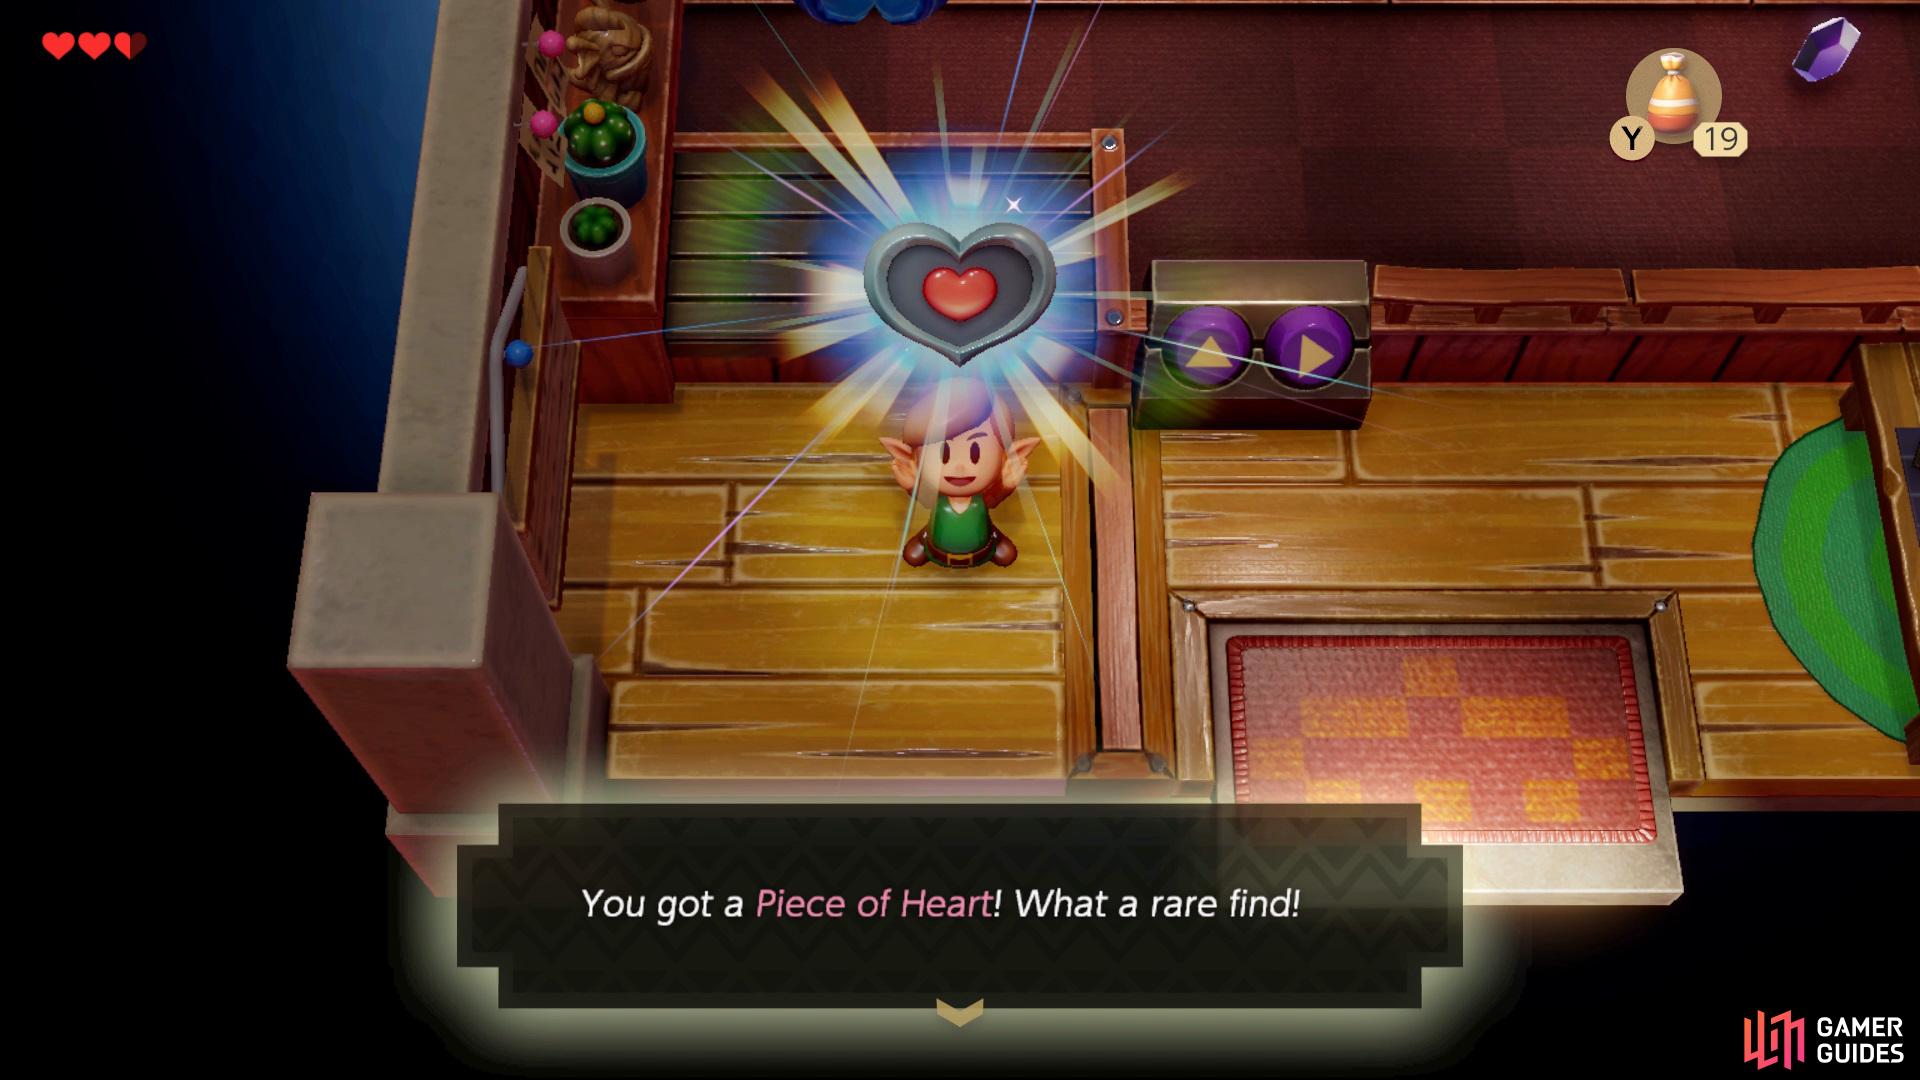 Go into the Trendy Game shop and win yourself a Piece of Heart, then after you’ve won some more items you’ll be able to win a Piec of Heart.